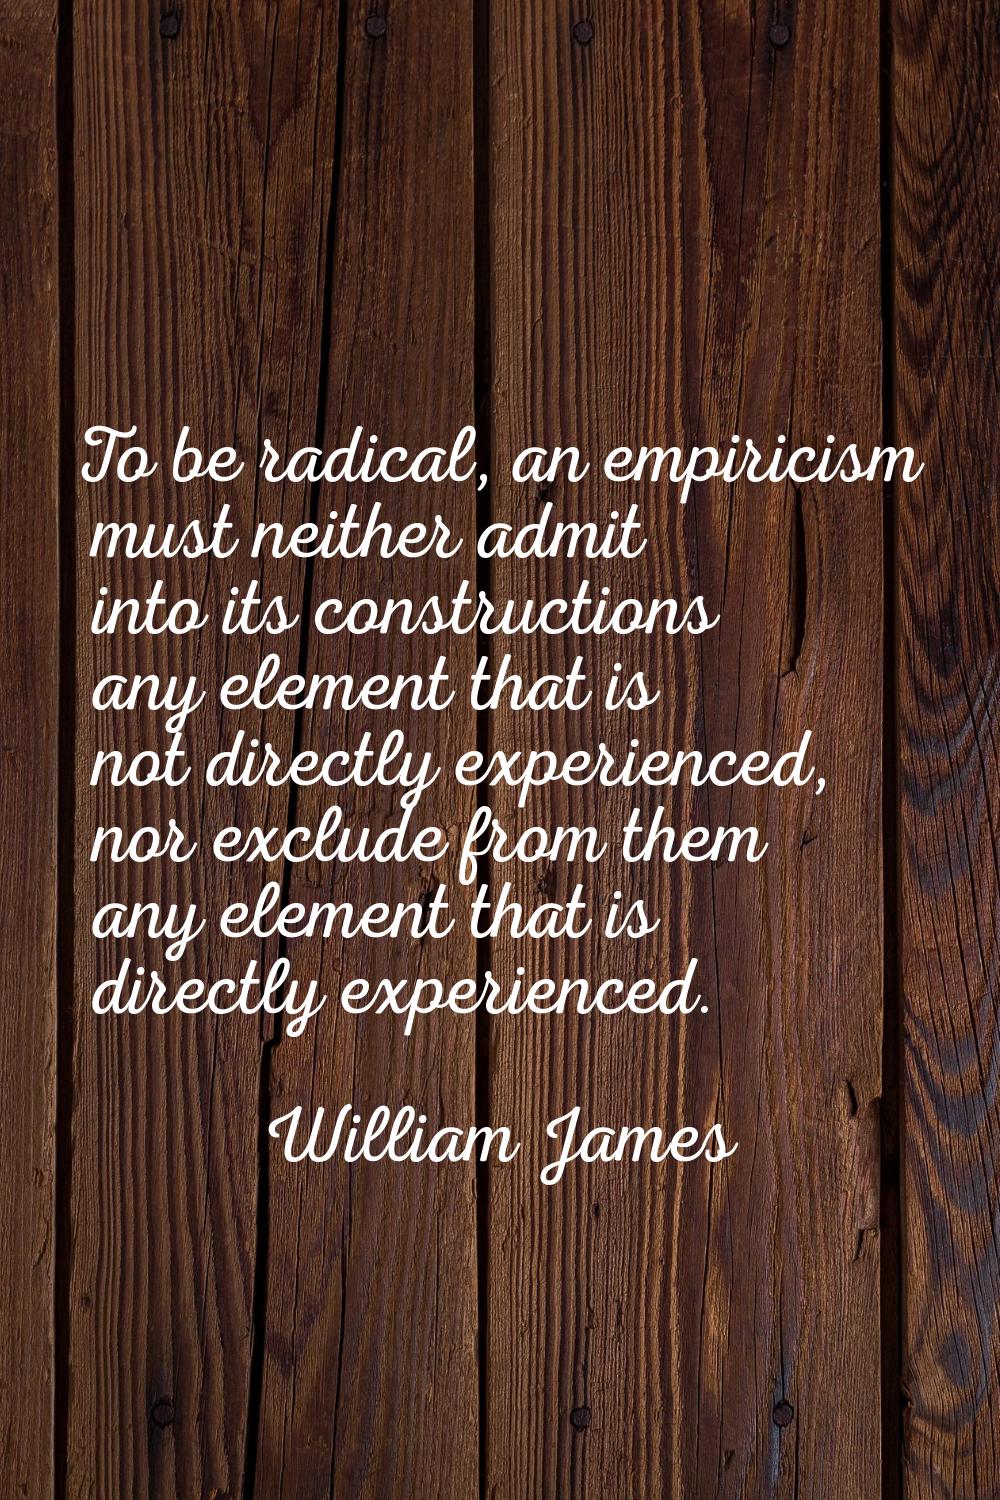 To be radical, an empiricism must neither admit into its constructions any element that is not dire